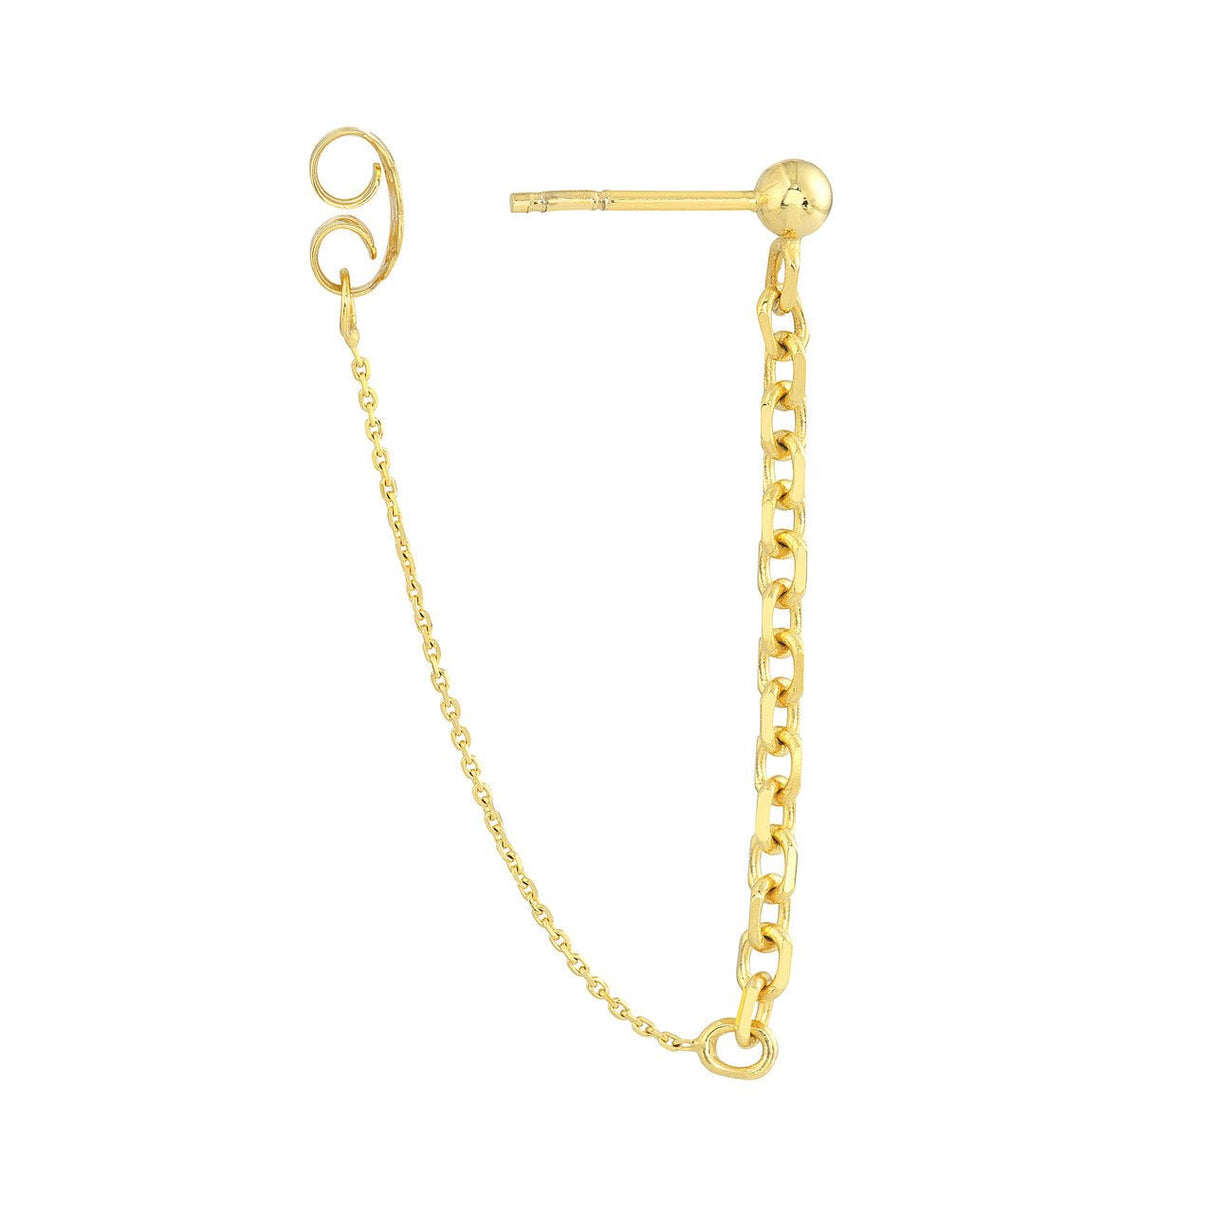 14K Solid Gold 50/50 Cable Chain Front-to-Back Earrings - Diamond Origin